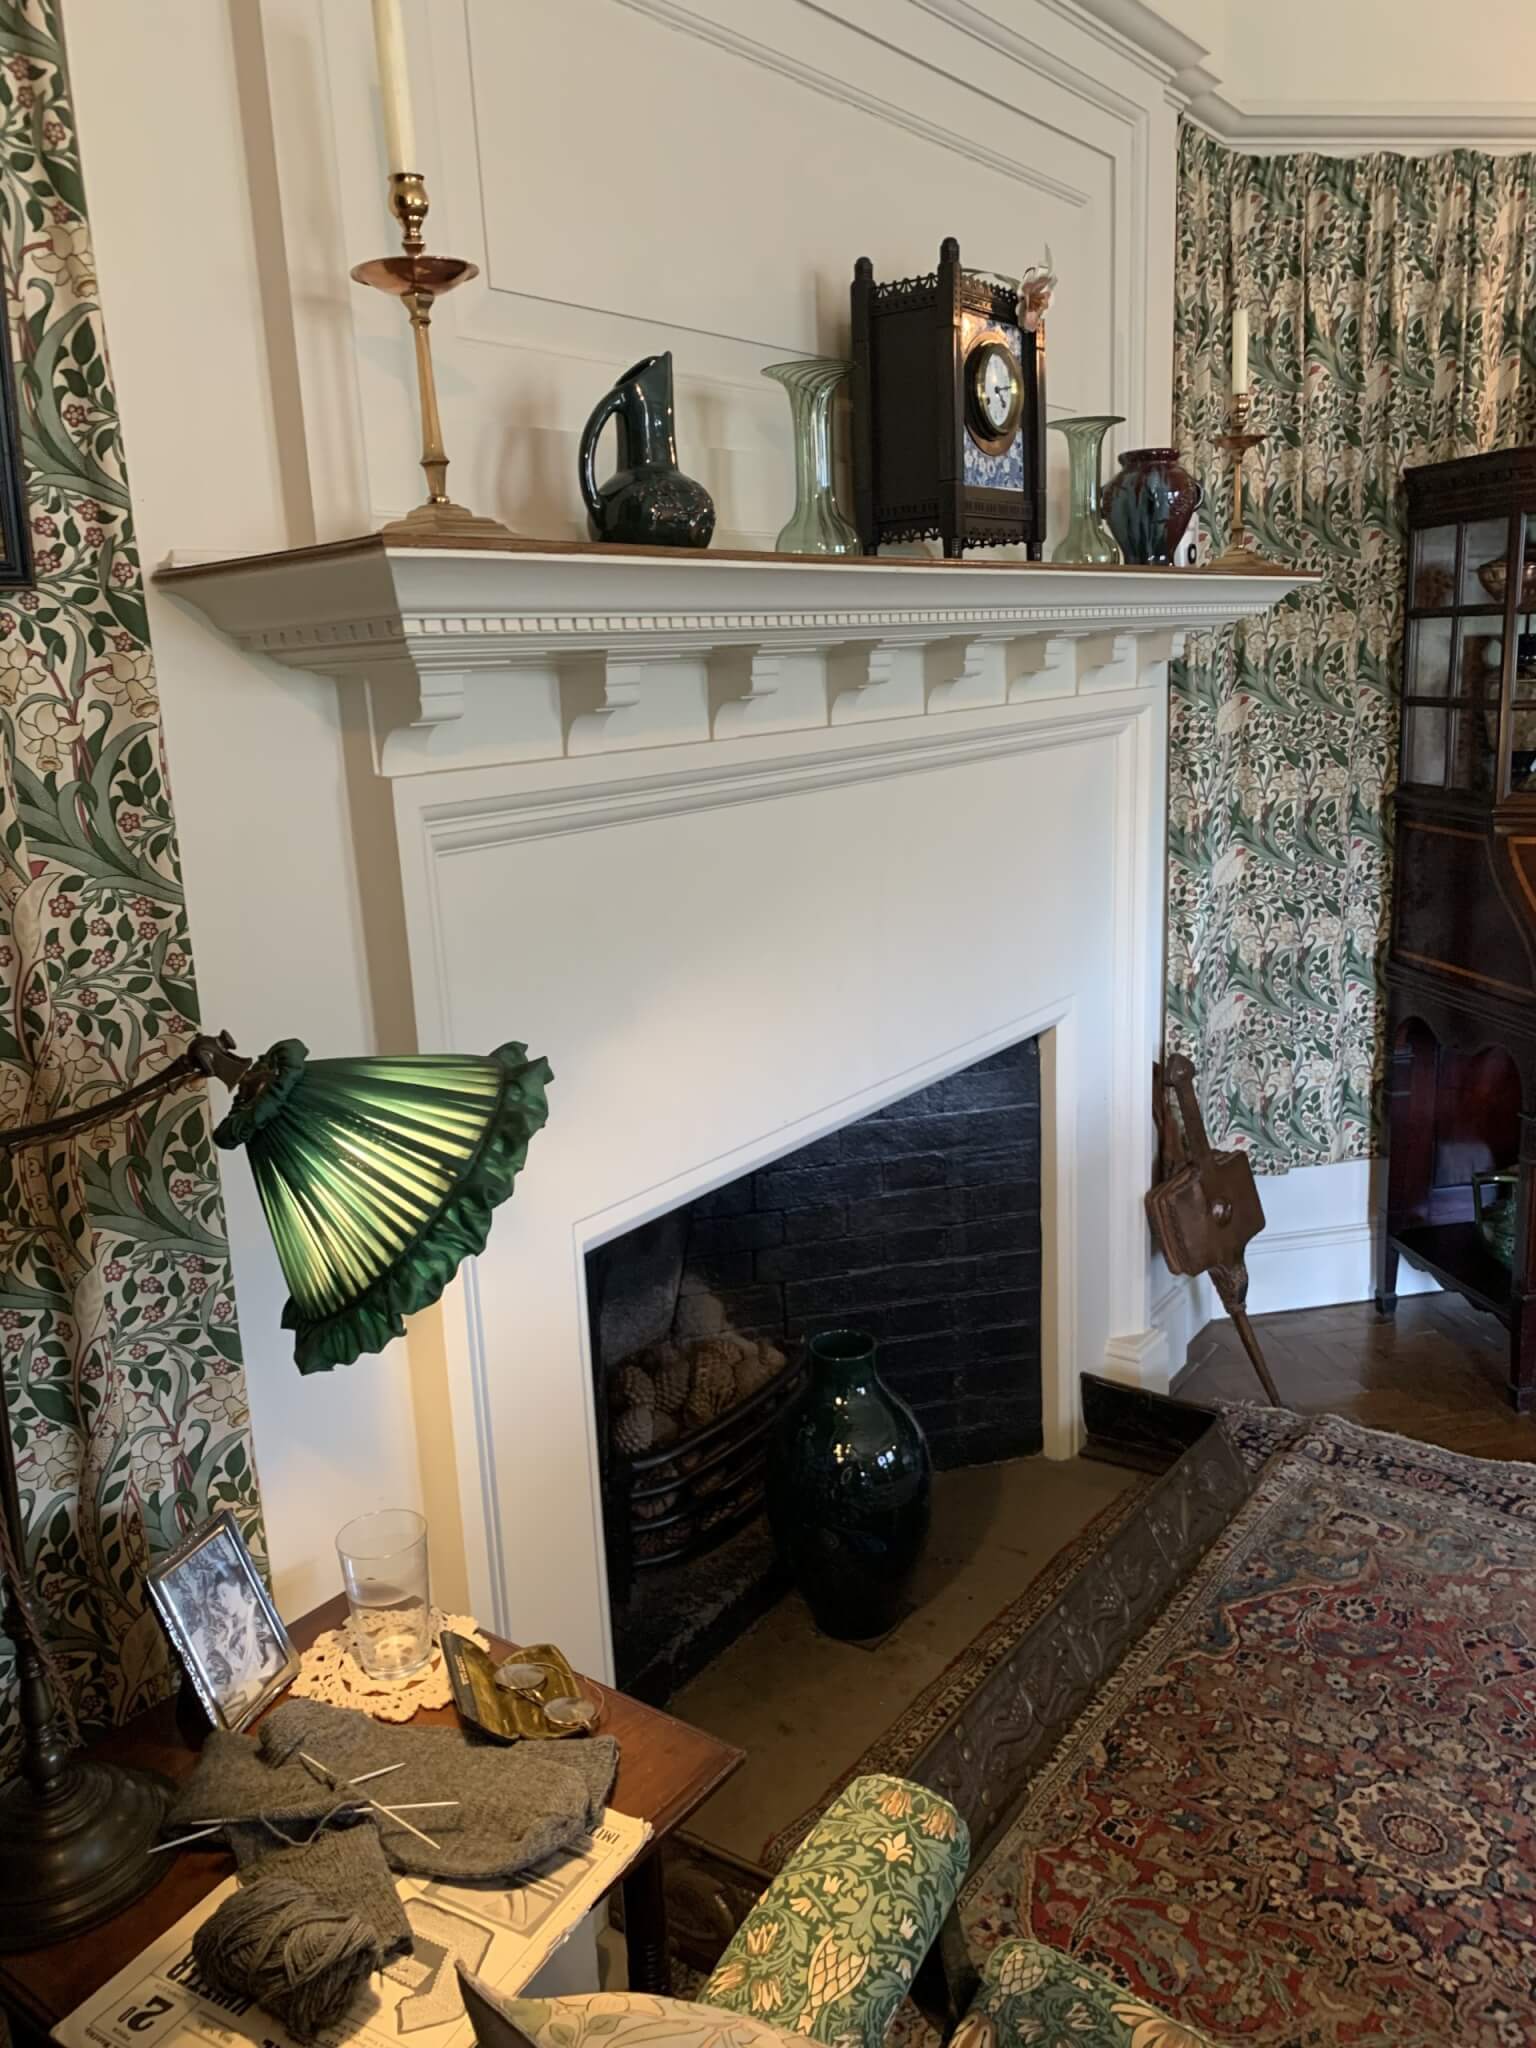 A corner of one of the rooms inside Standen. You can see the Morris and Co curtains and fabric on the chair